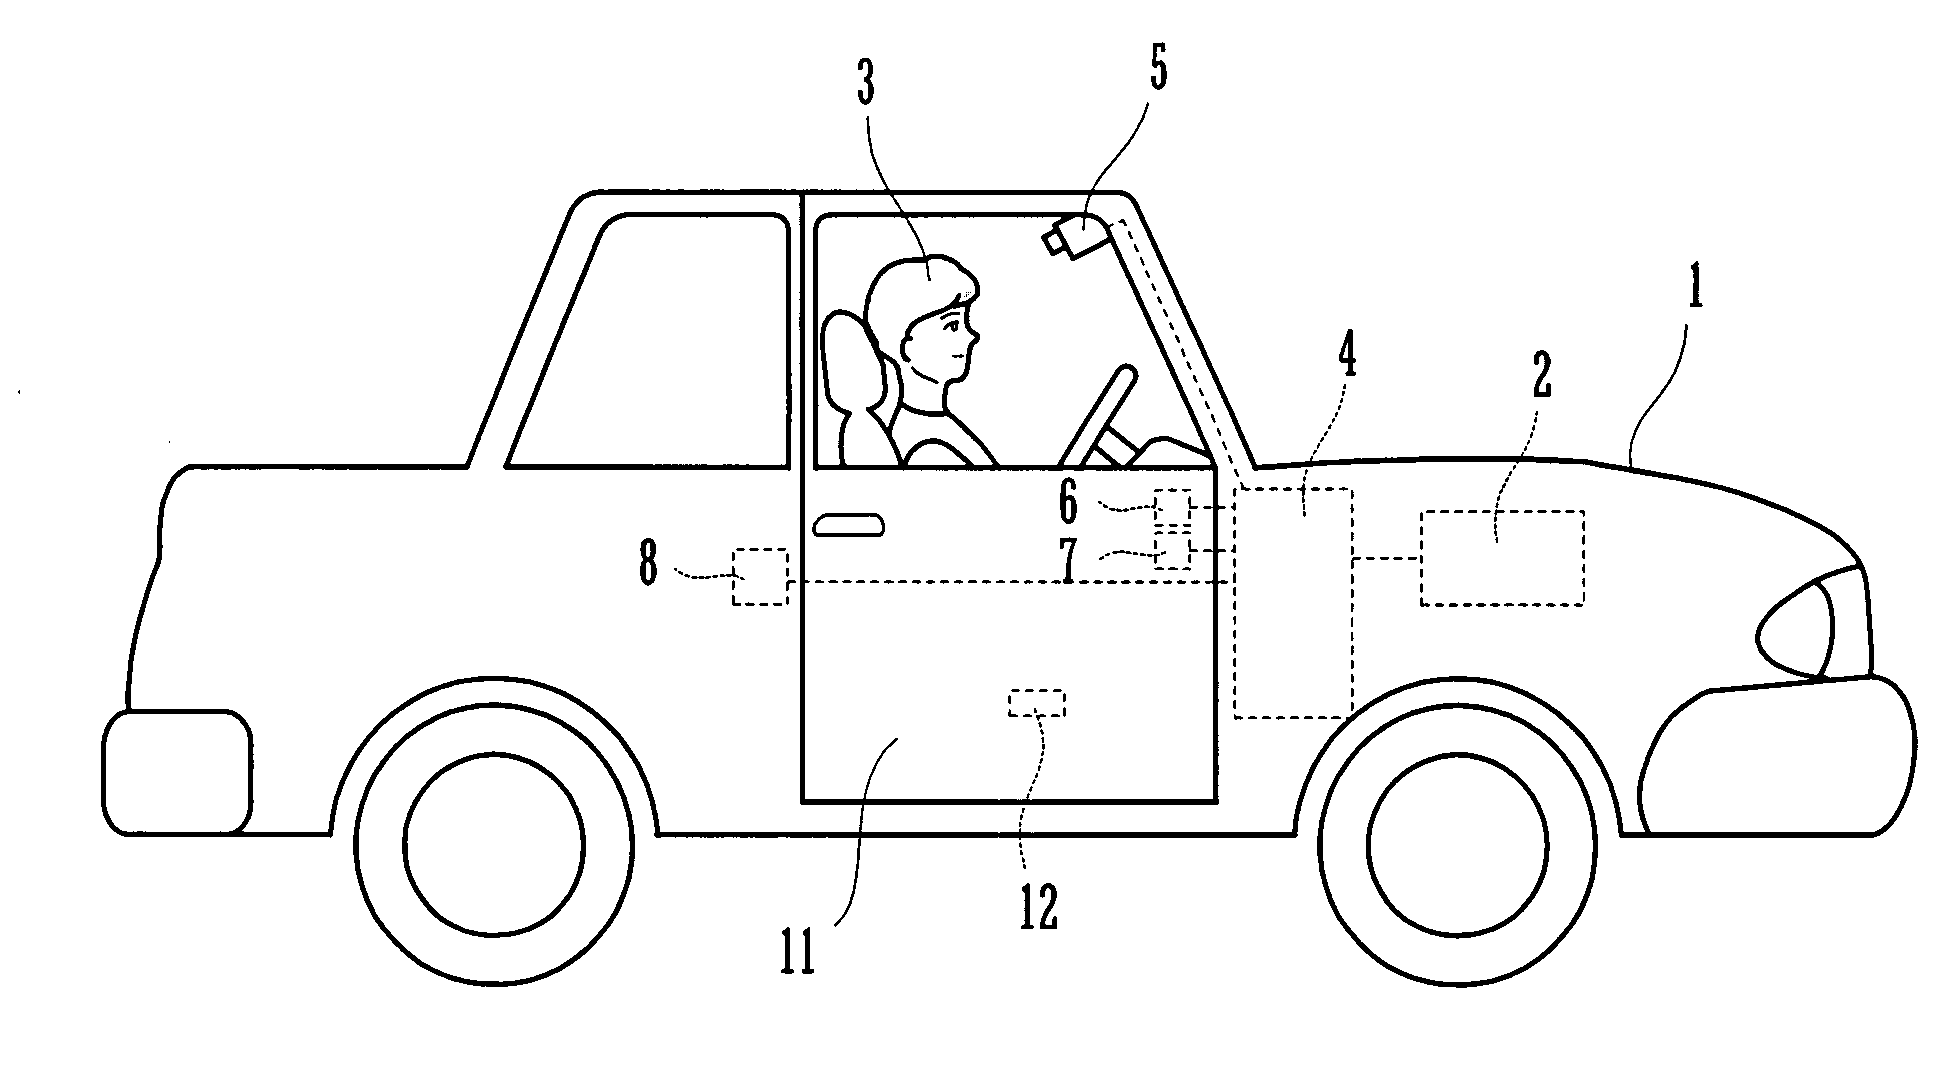 Apparatus for authenticating vehicle driver